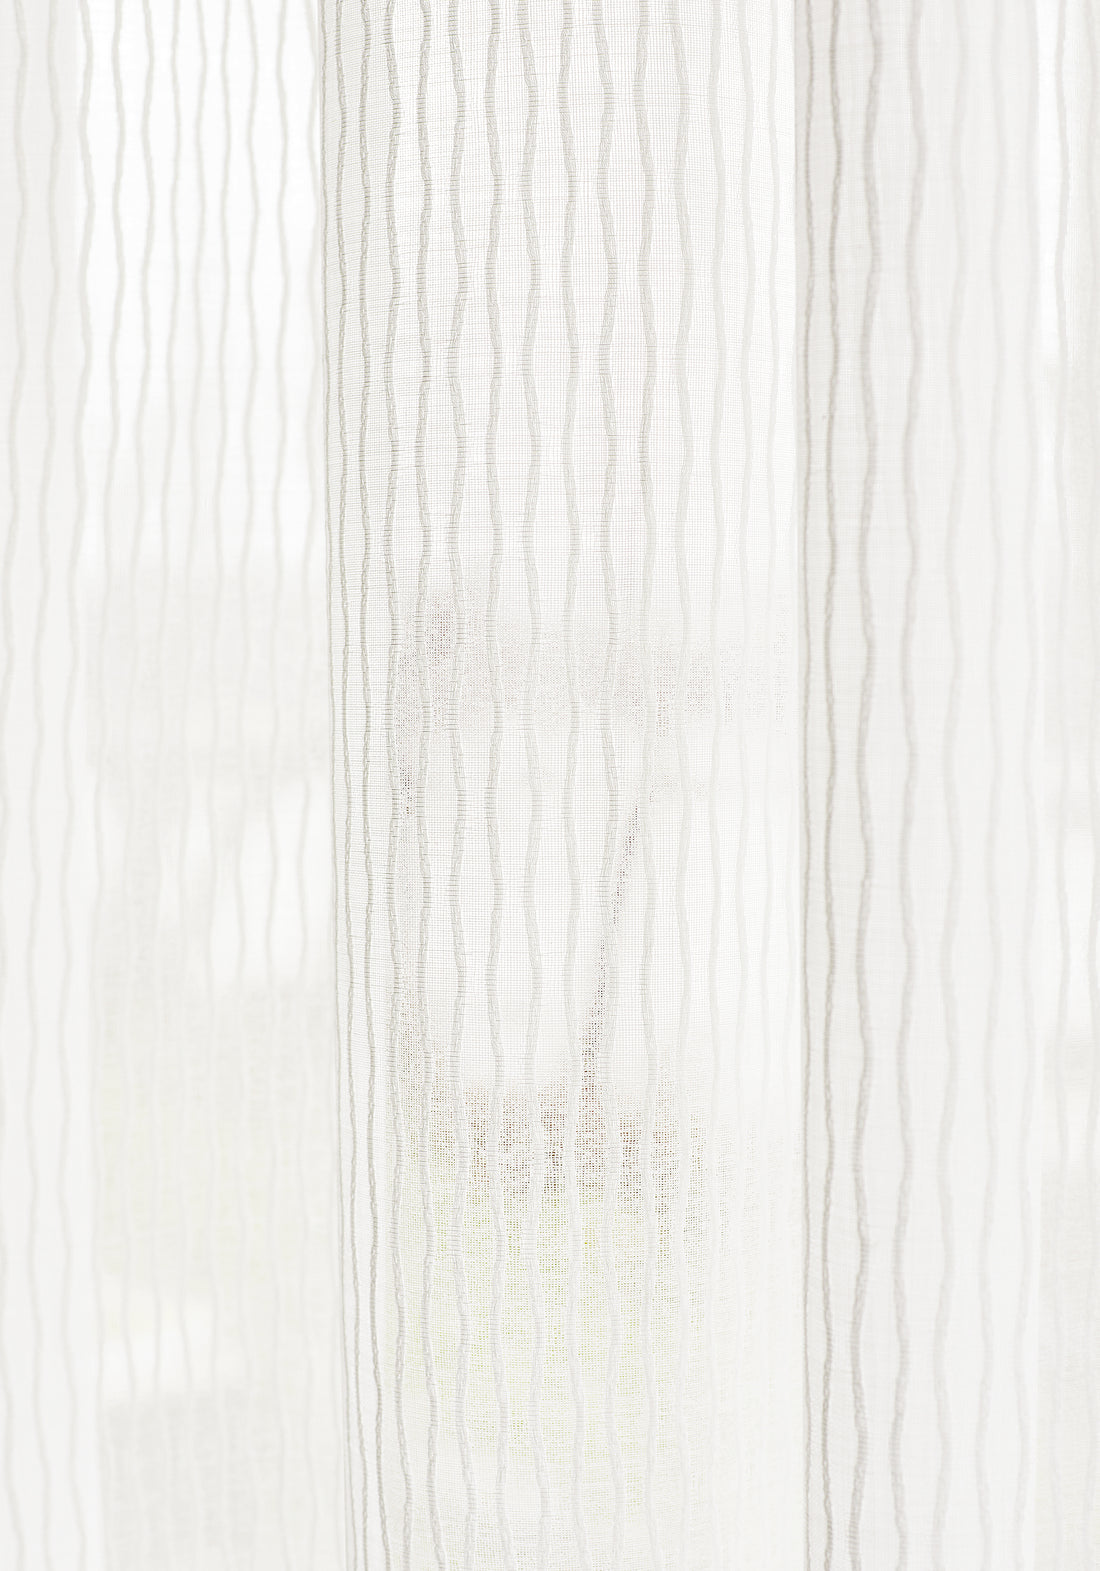 sheer drapery curtains made with Aruba Sheer fabric in snow white color - pattern number FWW7153 - by Thibaut fabrics